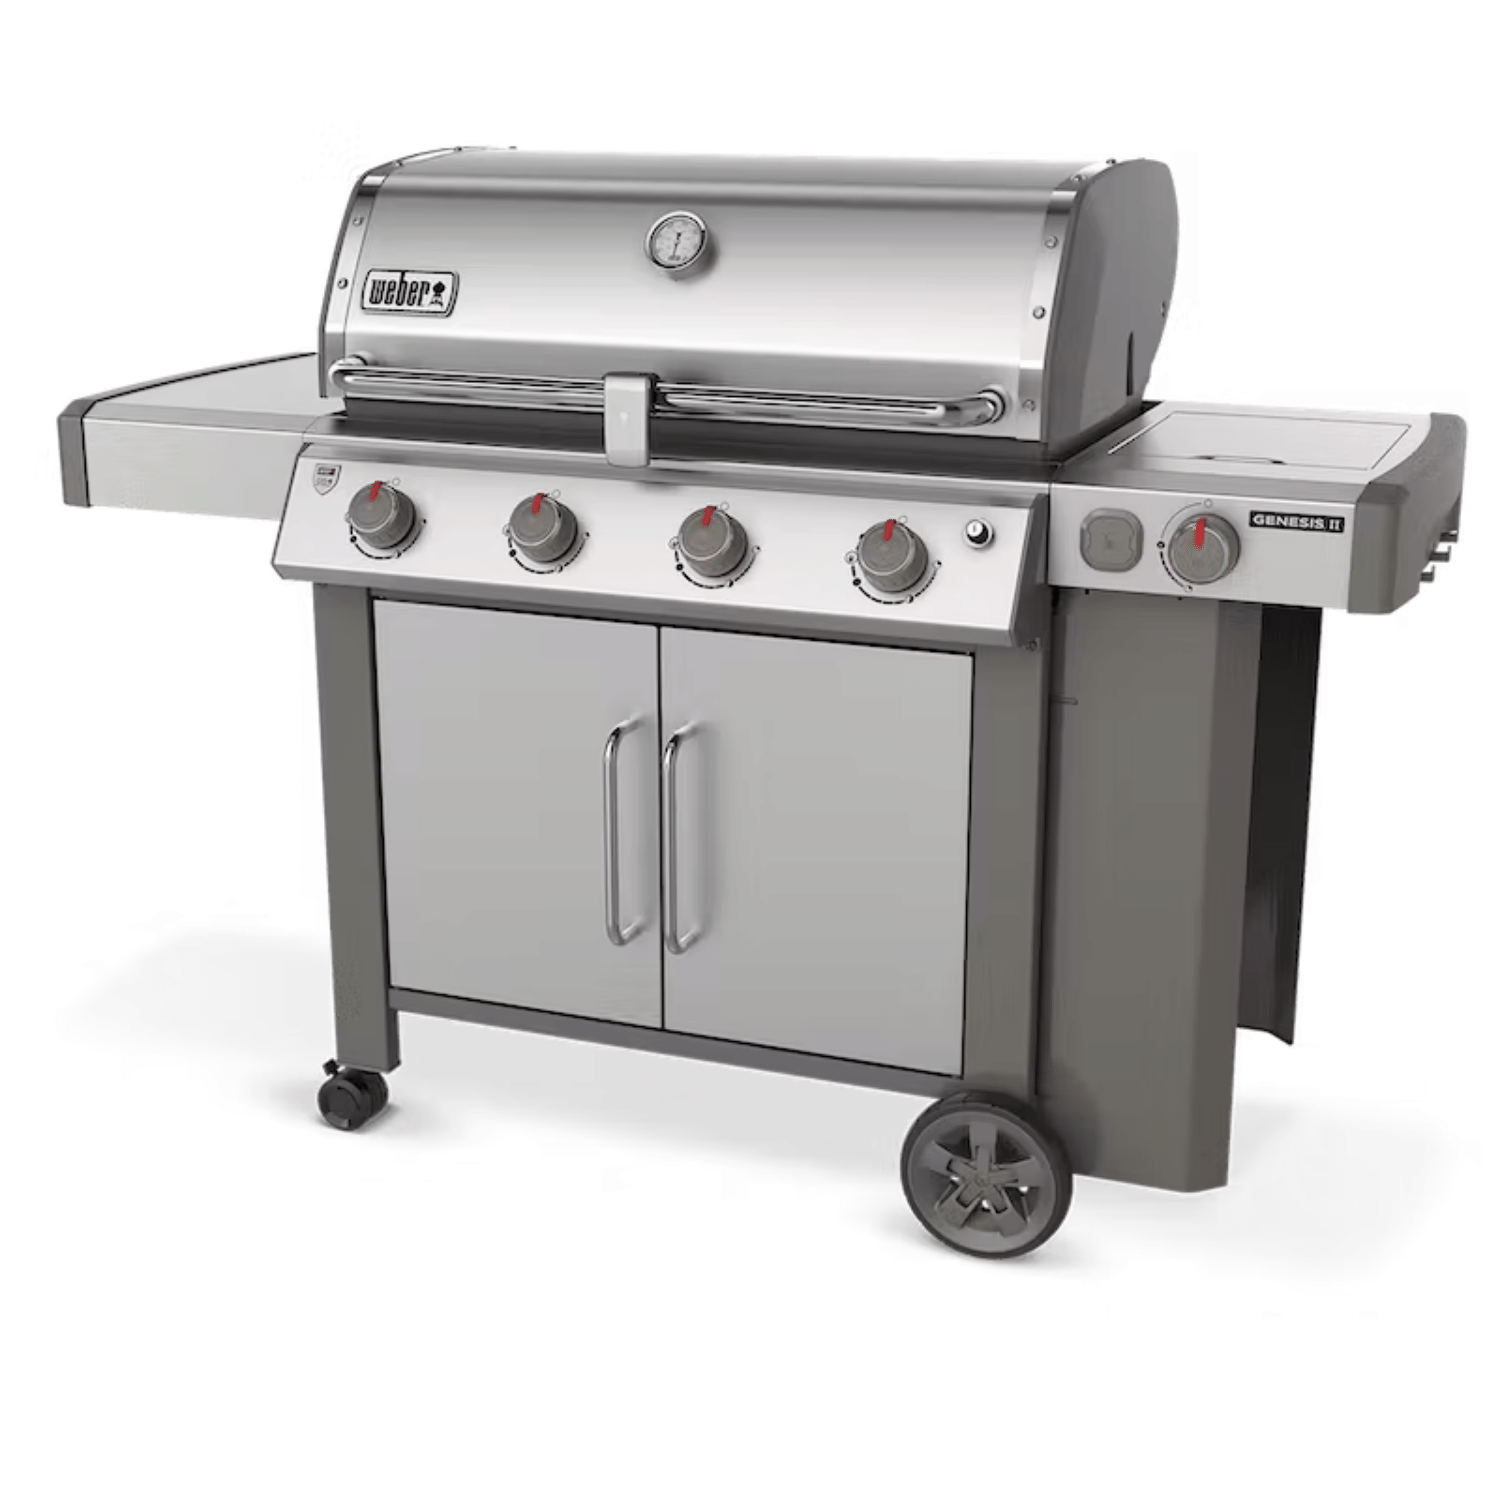 Weber Genesis II E-455 premium grill for outdoor barbecuing available at MeatKing.hk1